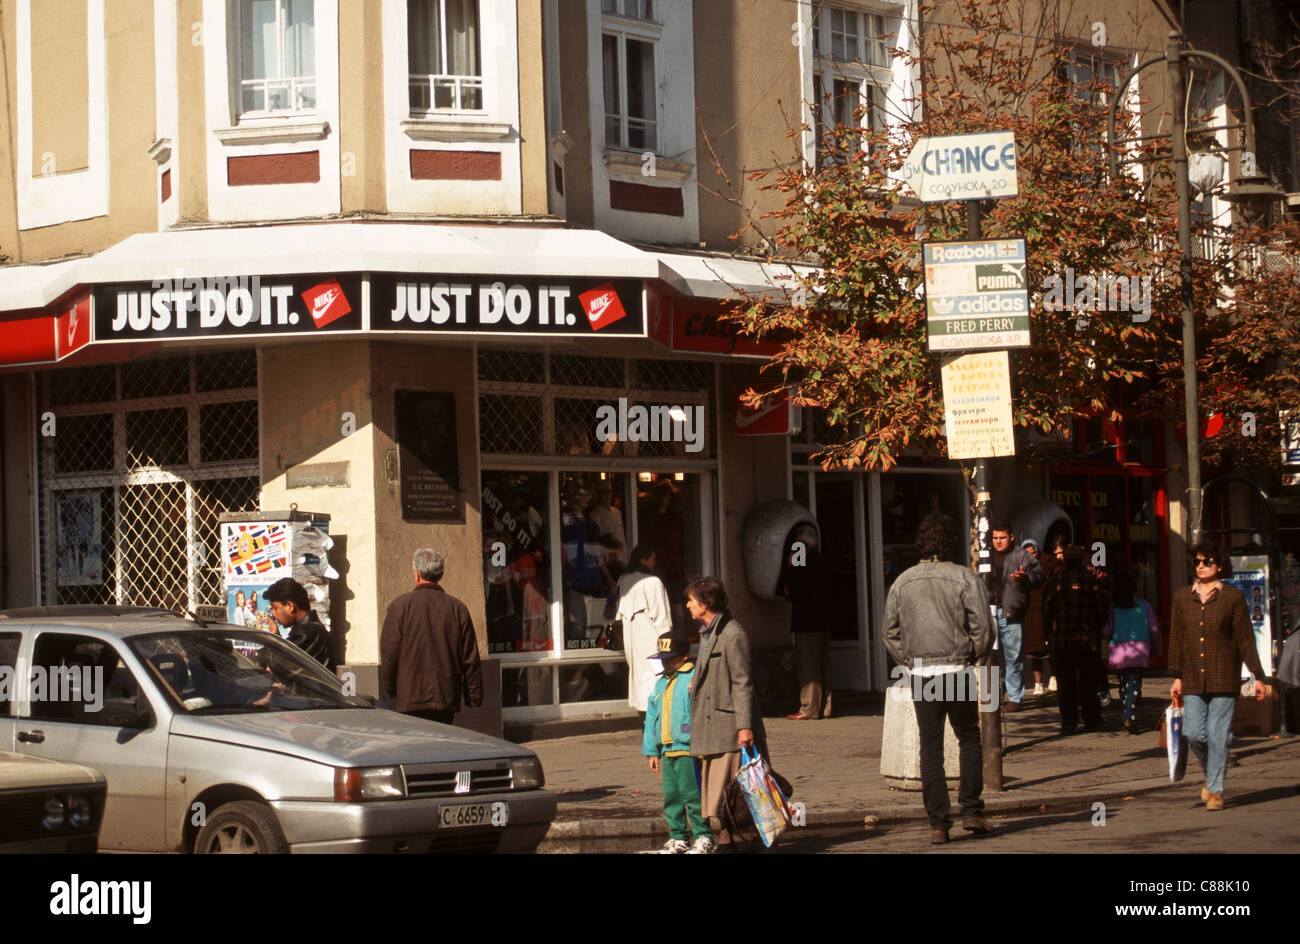 Sofia, People on the street; "Just do it" sign on a NIKE shop Stock Photo - Alamy